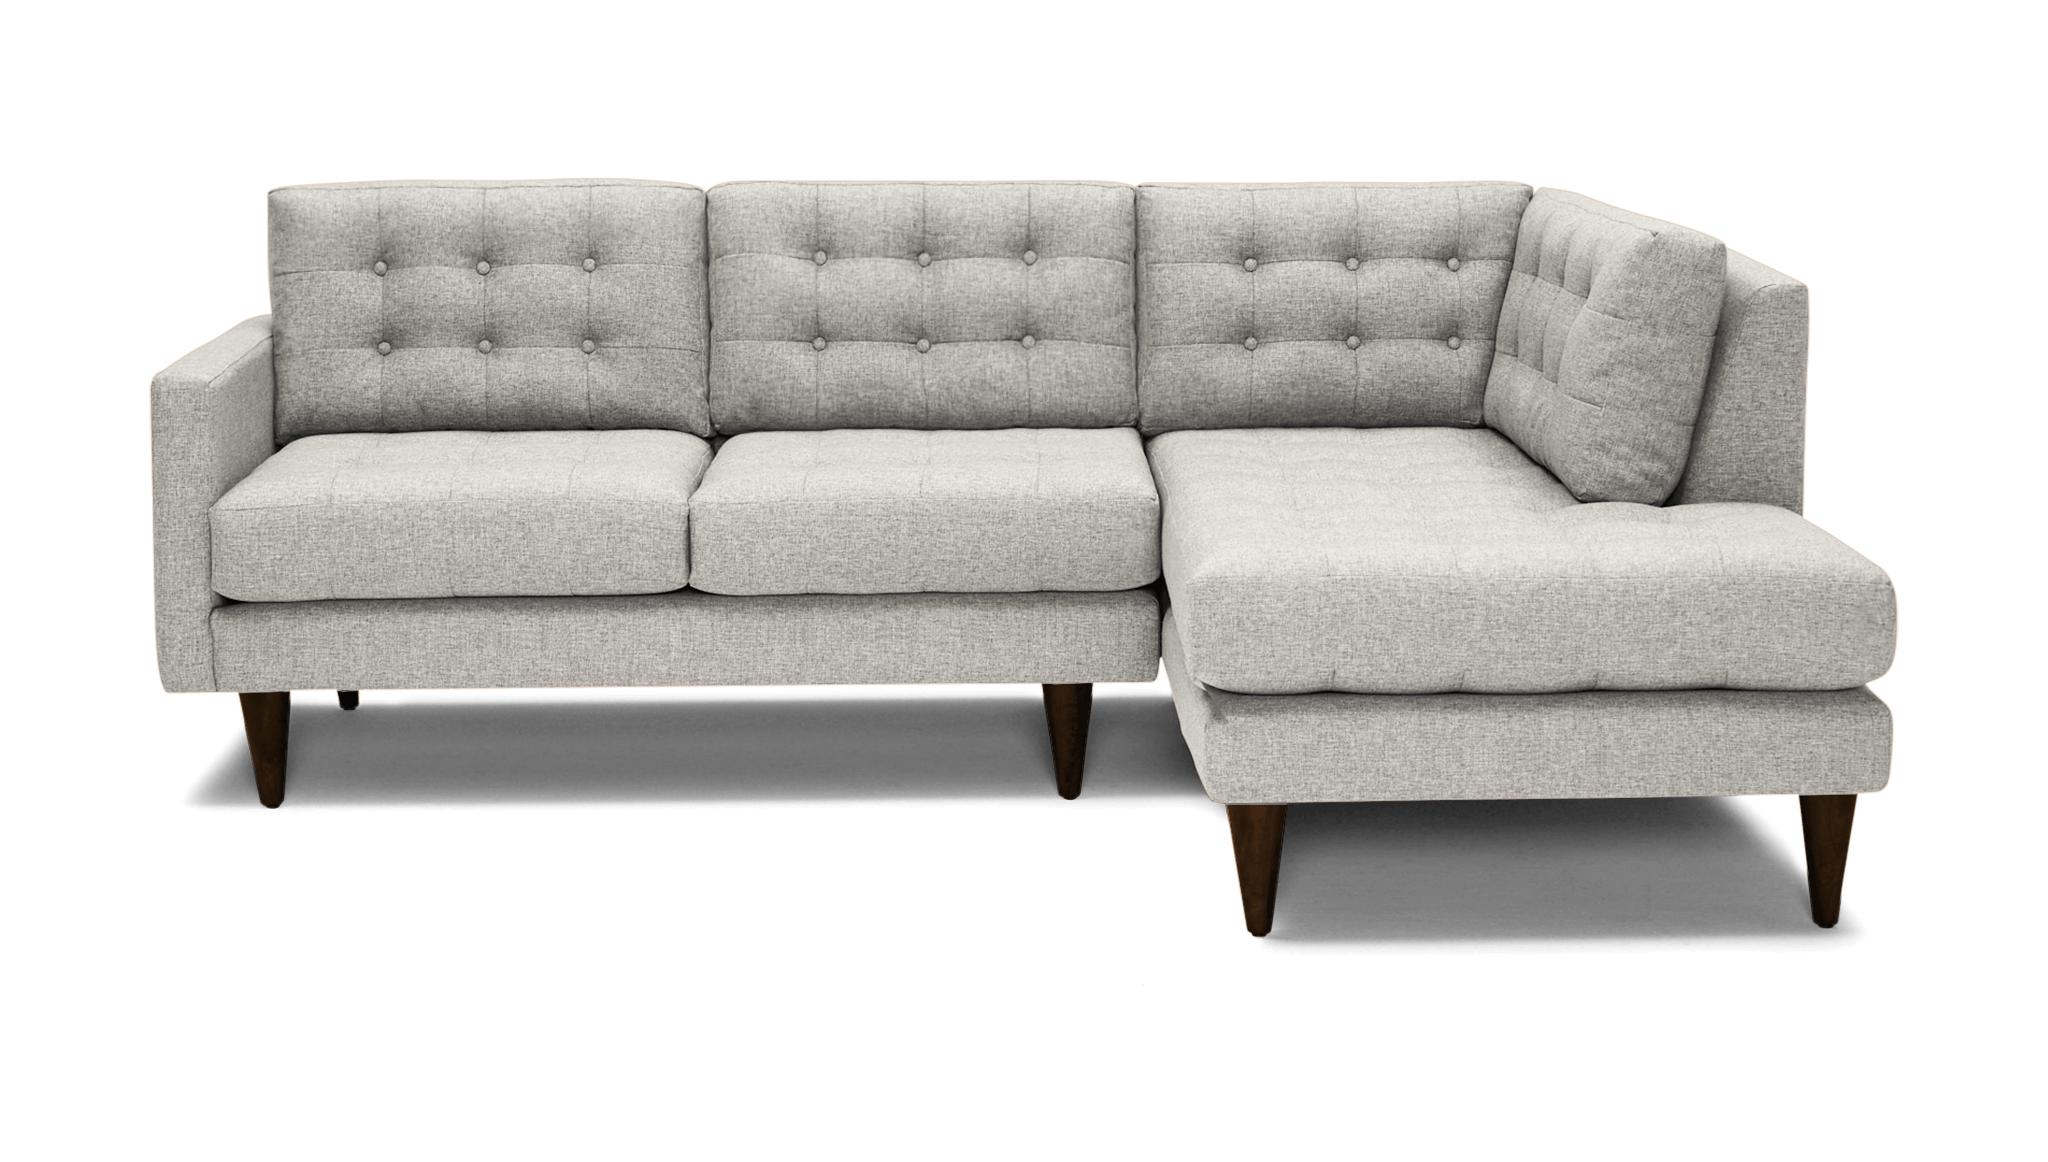 White Eliot Mid Century Modern Apartment Sectional with Bumper - Tussah Snow - Mocha - Right  - Image 4